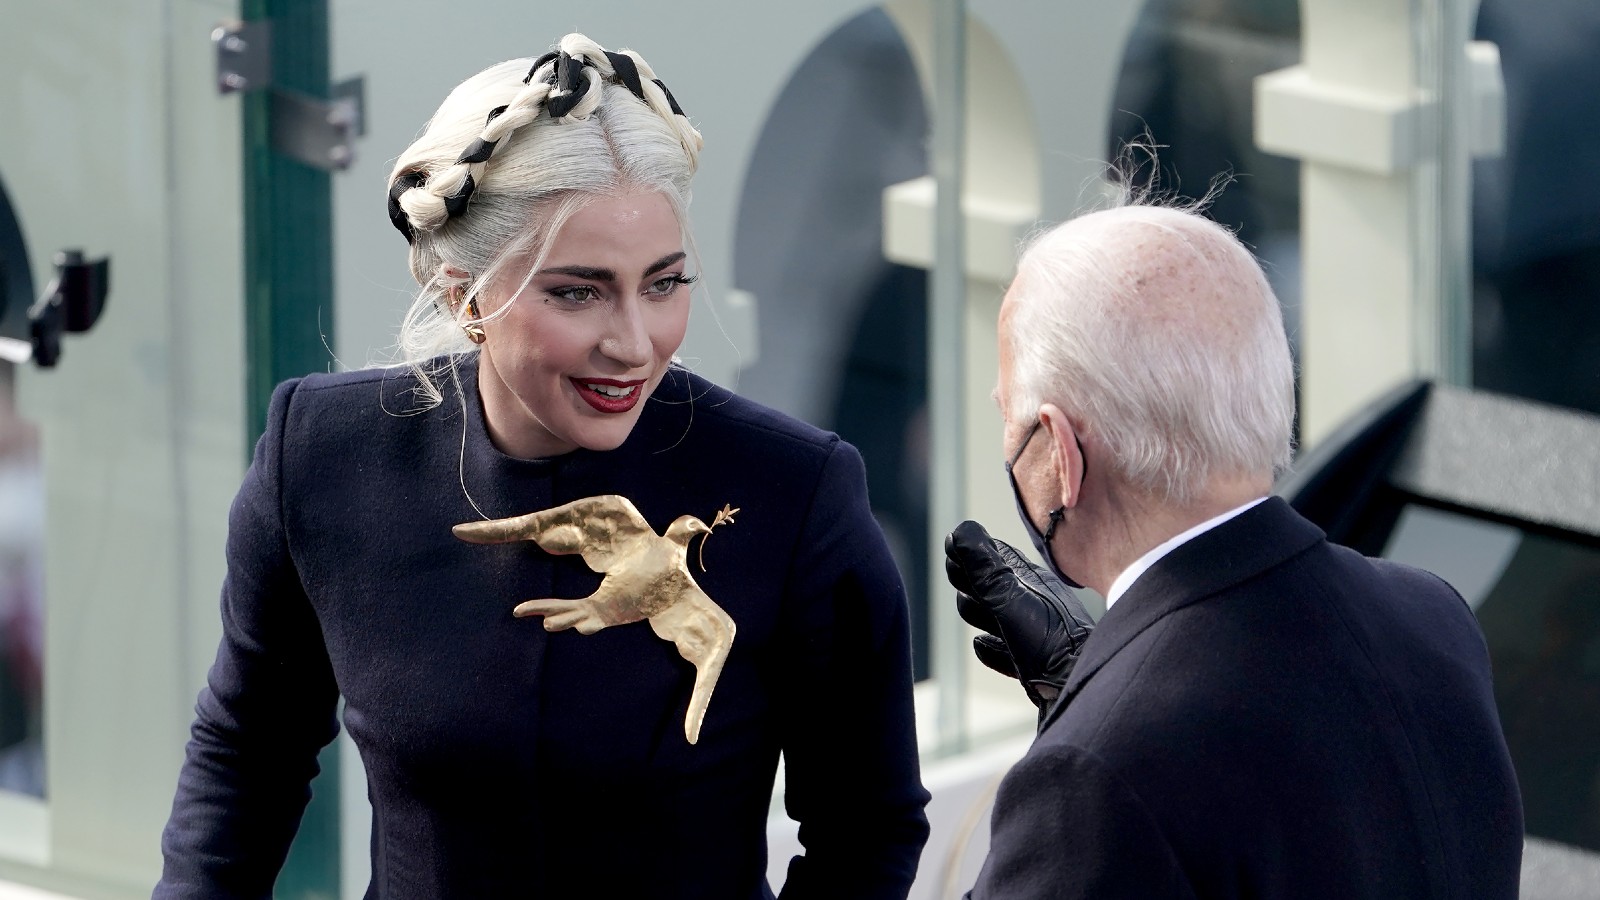 Inauguration Outfit Meanings: Lady Gaga's Brooch To Monochrome